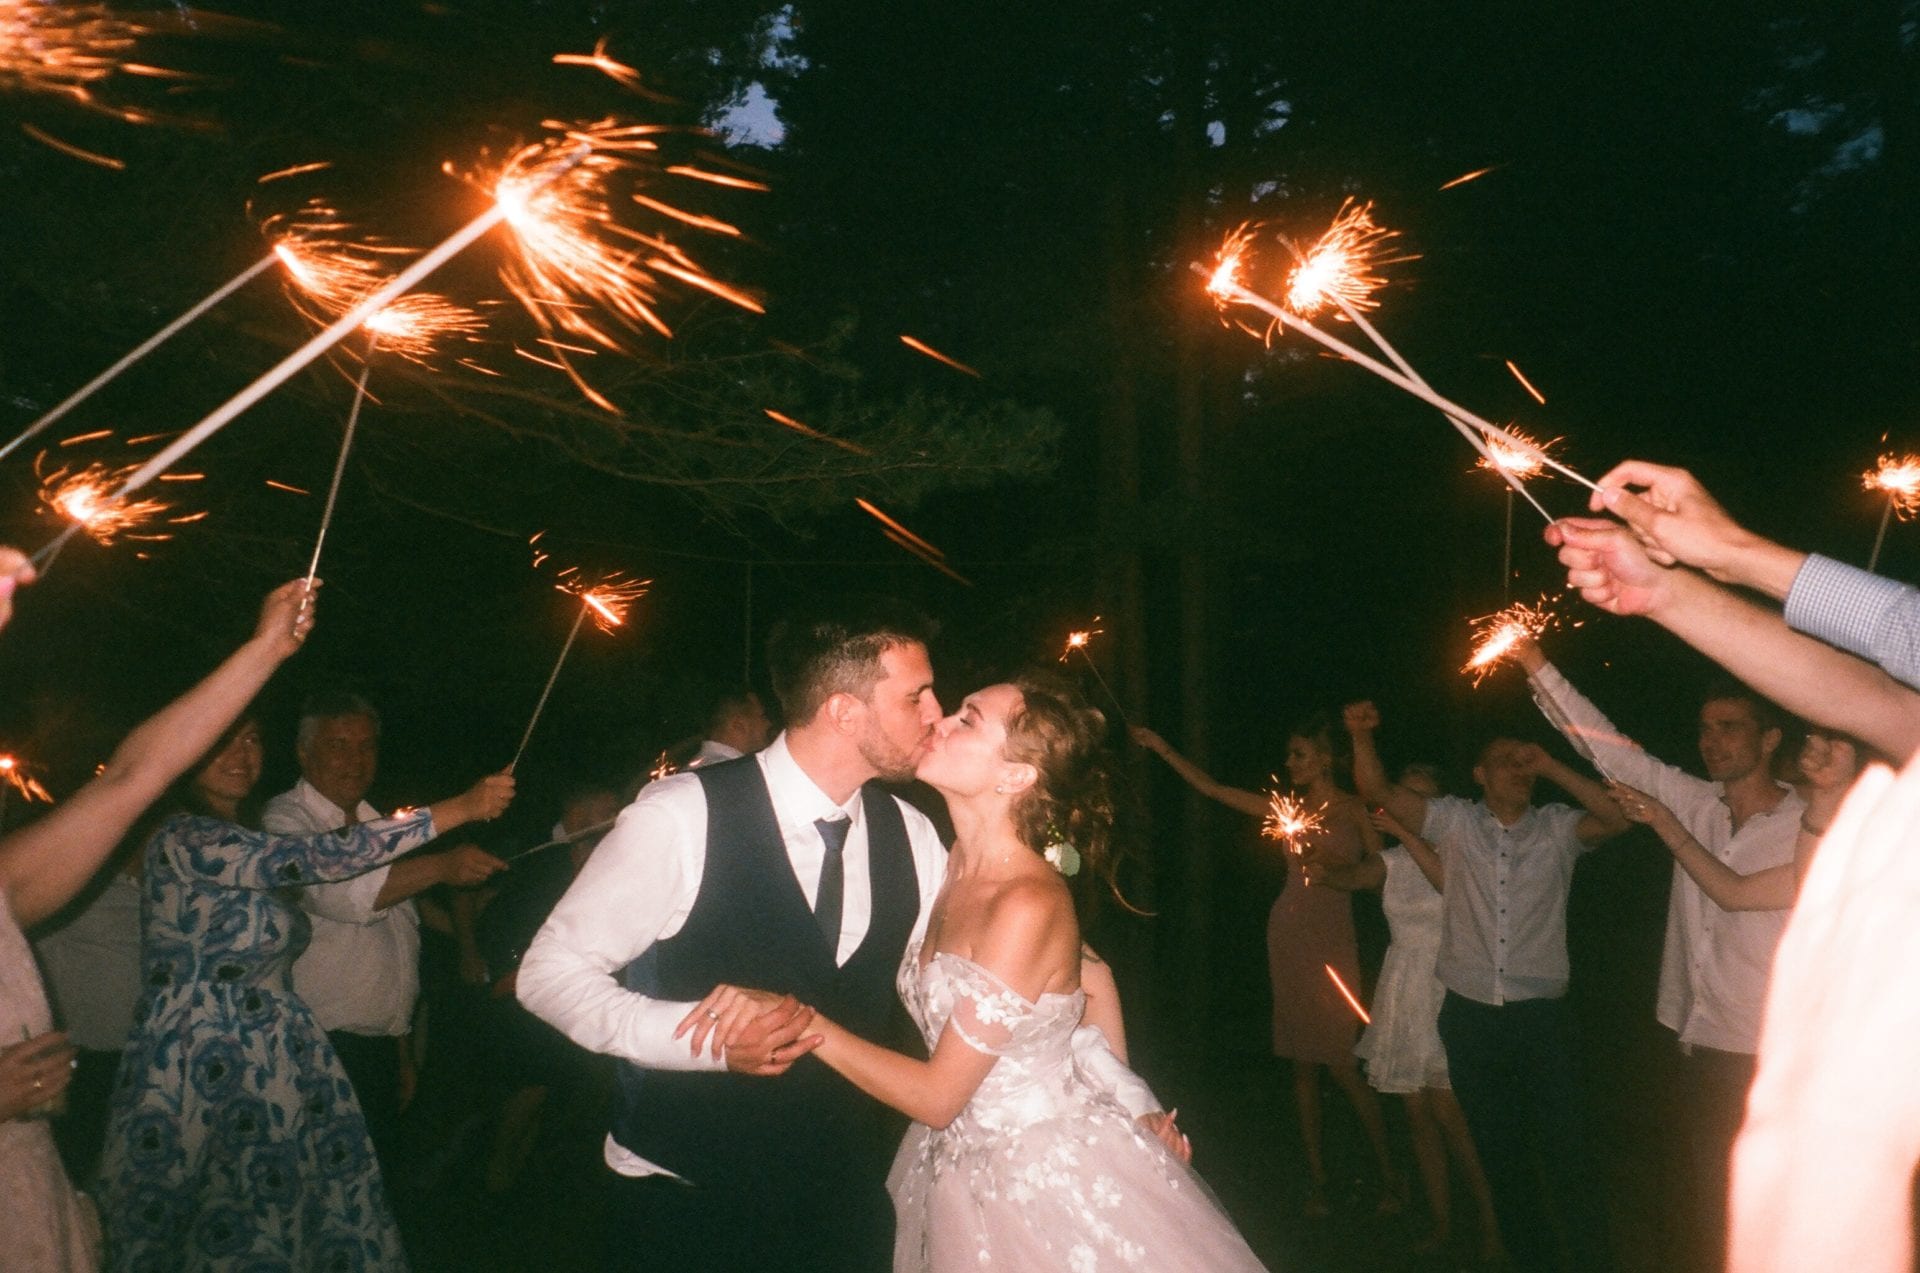 A couple kissing while holding sparklers in the air.